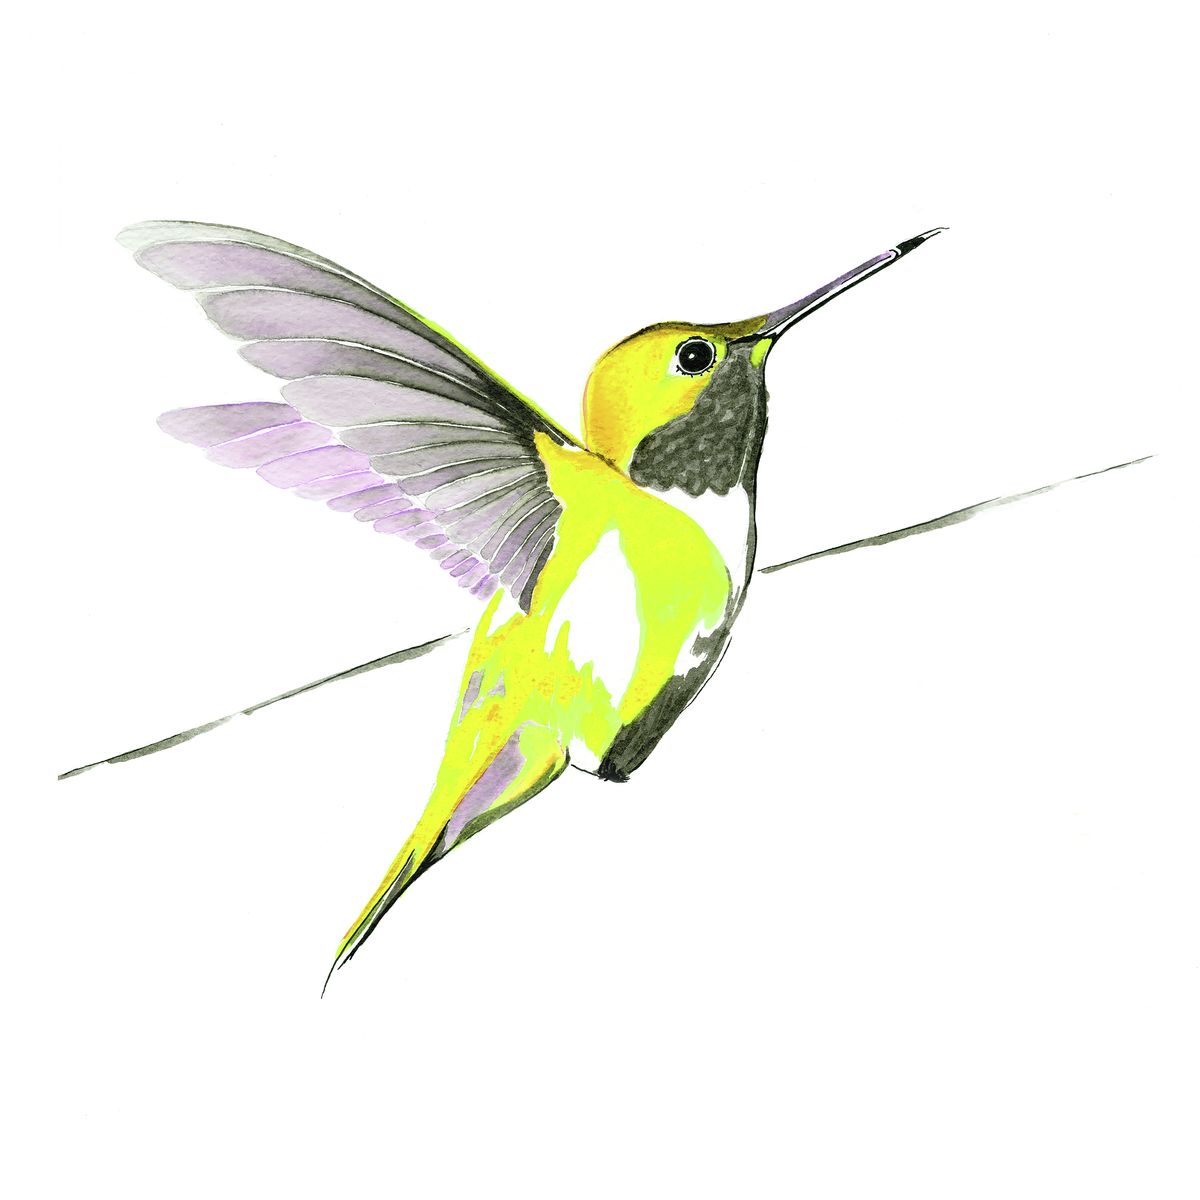 Humming bird in yellow limited edition print by Anna Jacobs